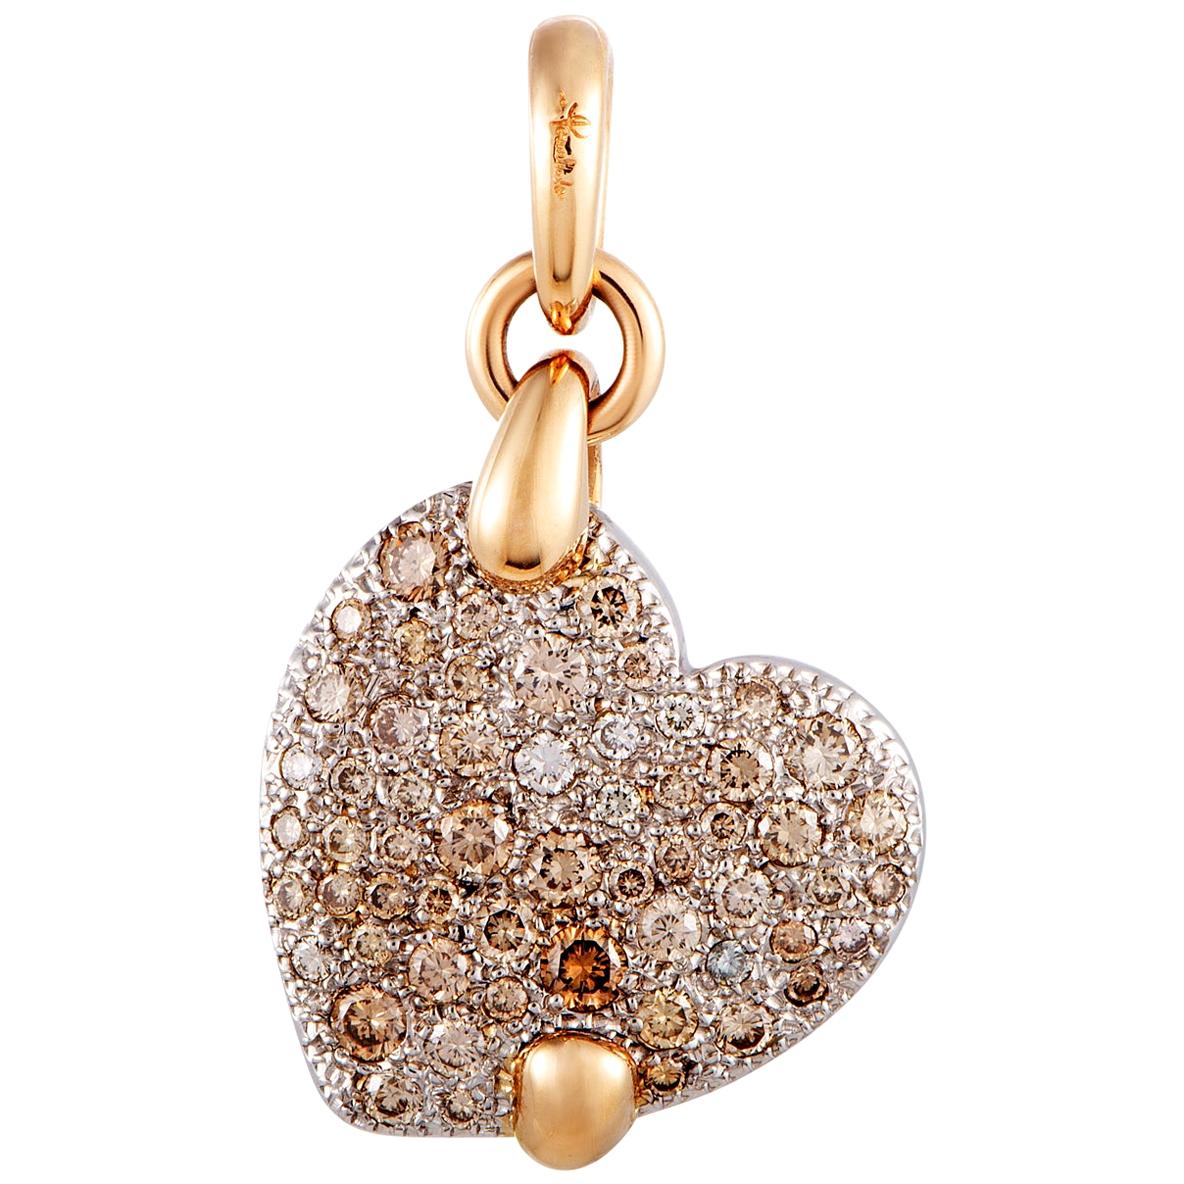 The Pomellato “Sabbia” pendant is crafted from 18K rose and white gold and set with diamonds. It weighs 16.1 grams, measuring 1.37” in length and 1.00” in width.

This item is offered in estate condition and includes the manufacturer’s box.